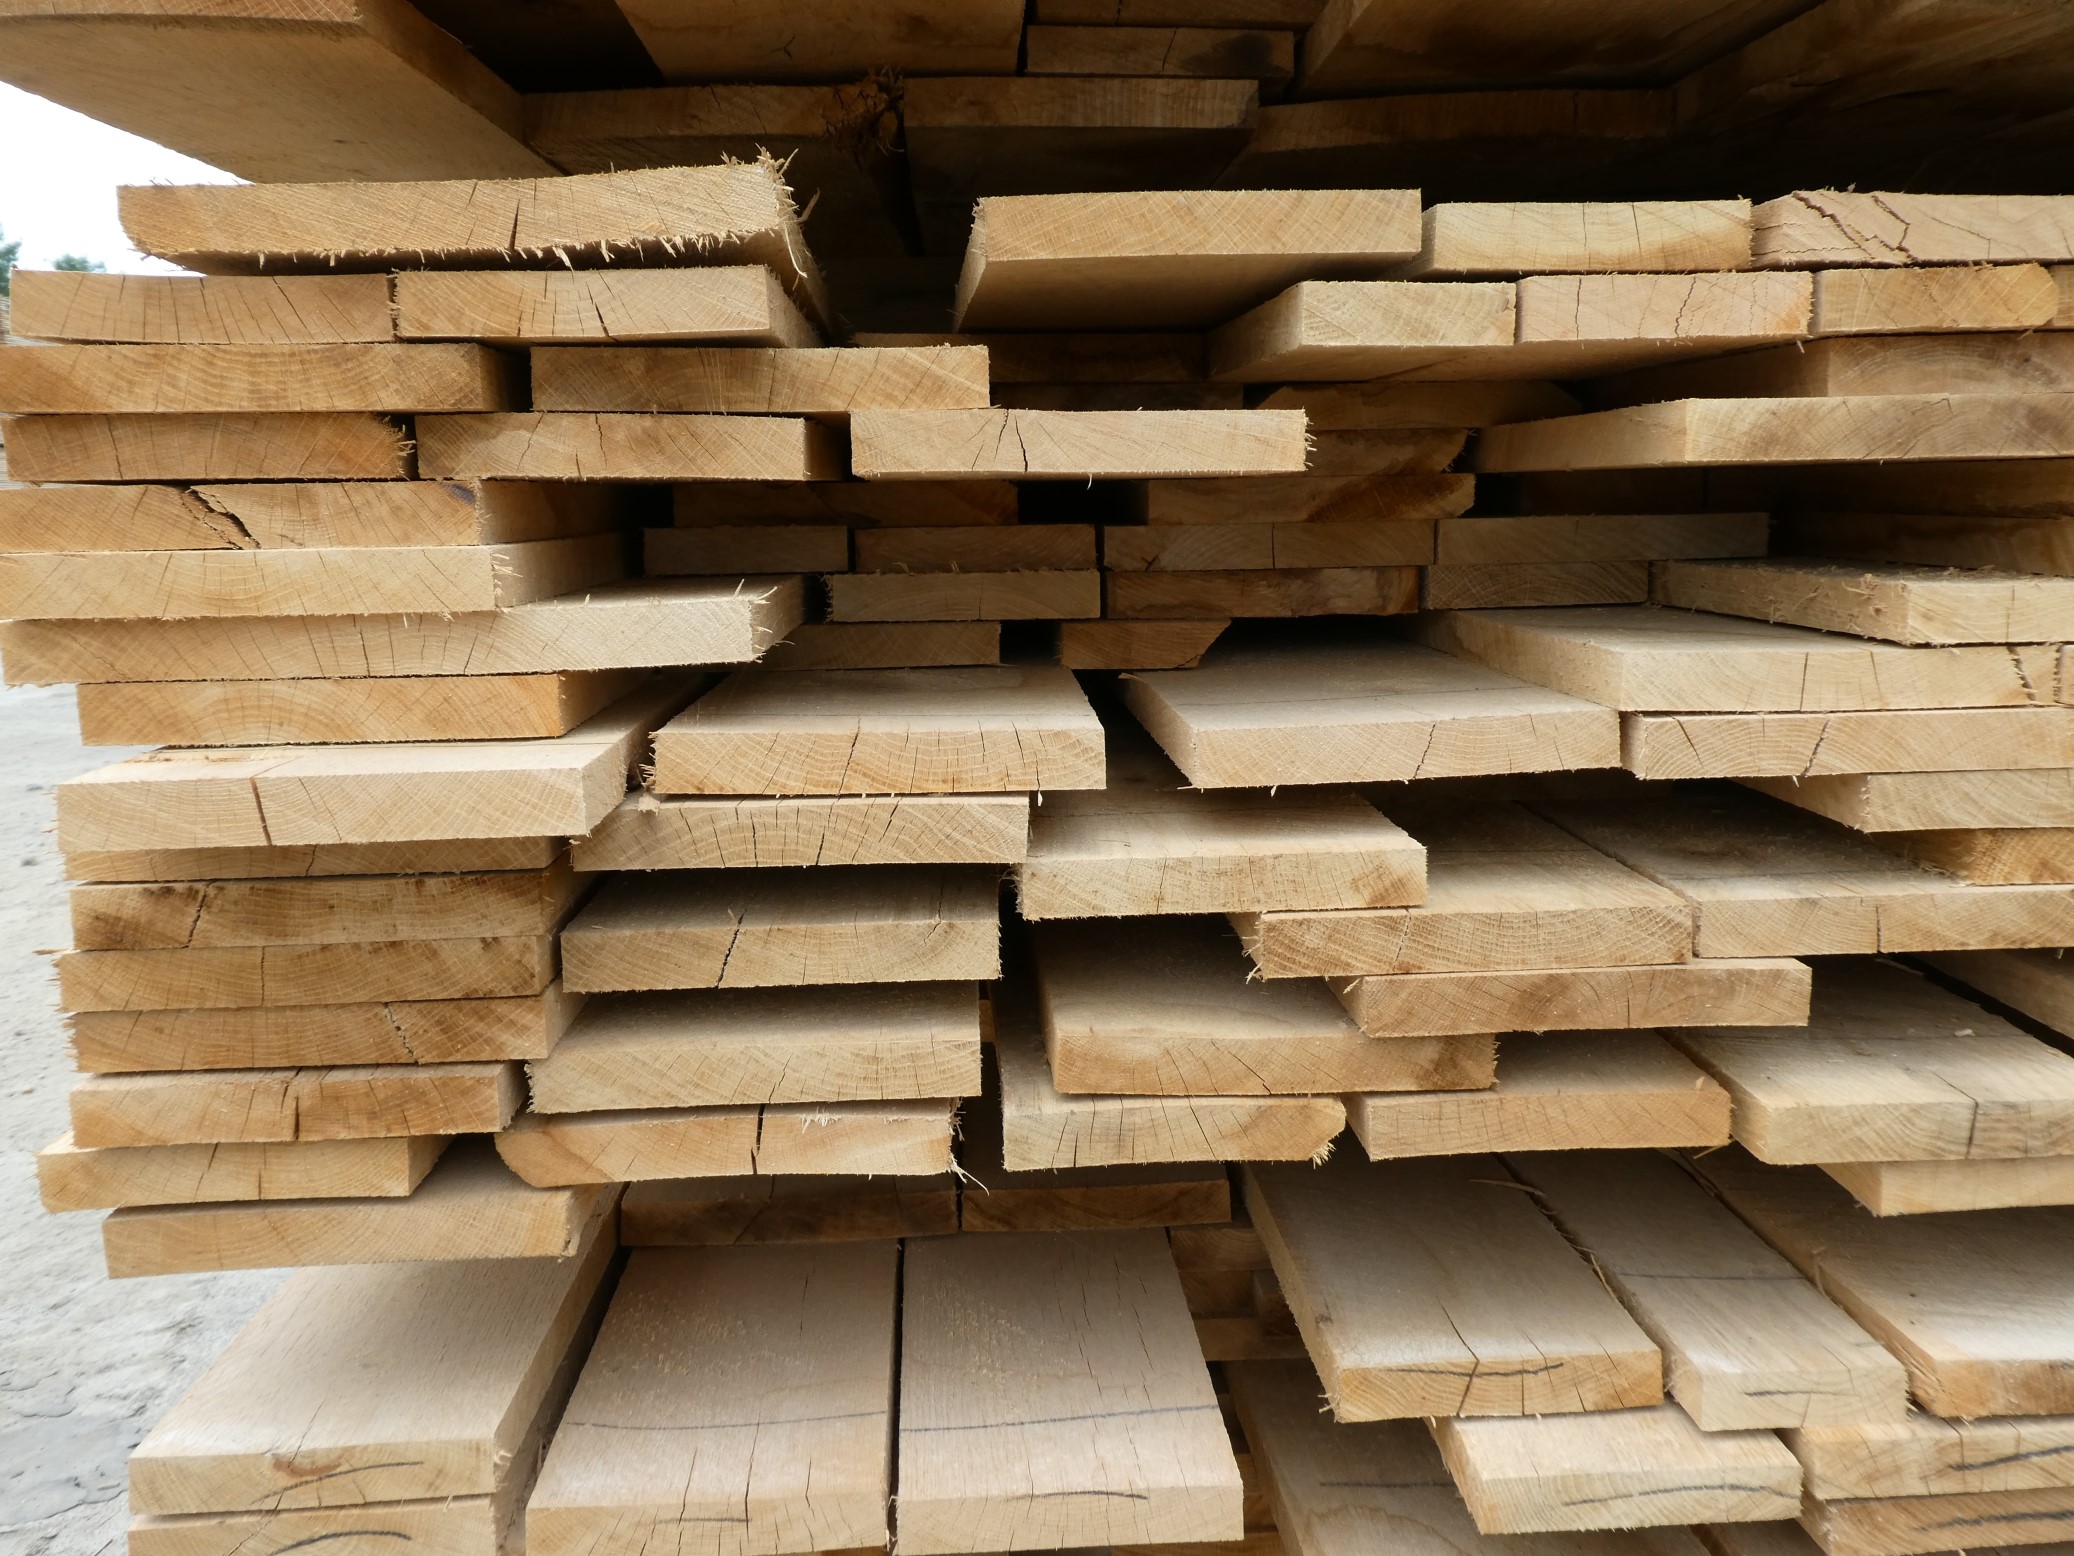 Stacks of Wood - Spring 2018 Southeastern Dry Kiln Club Meeting - College of Natural Resources at NC State University